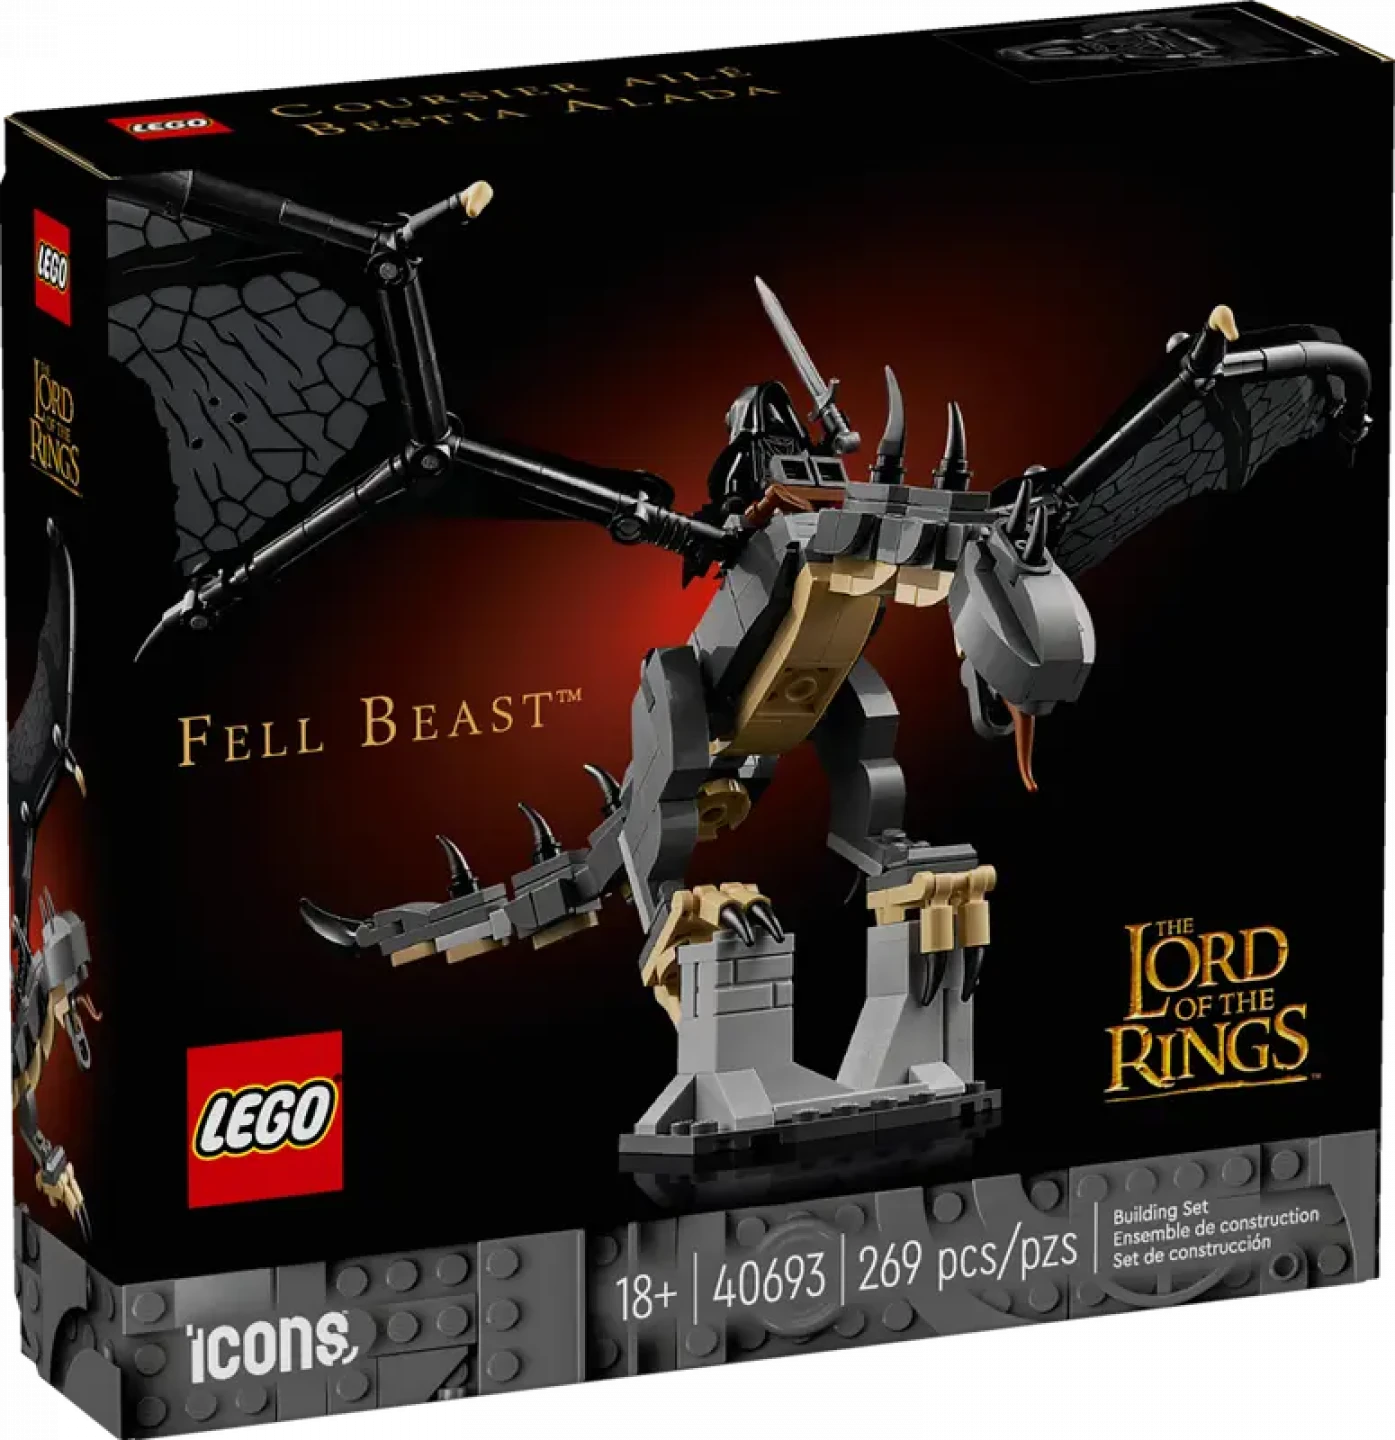 LEGO kondigt opwindende GWP aan bij LEGO Lord of the Rings - Barad-dûr (Tower of Sauron) Set 10333